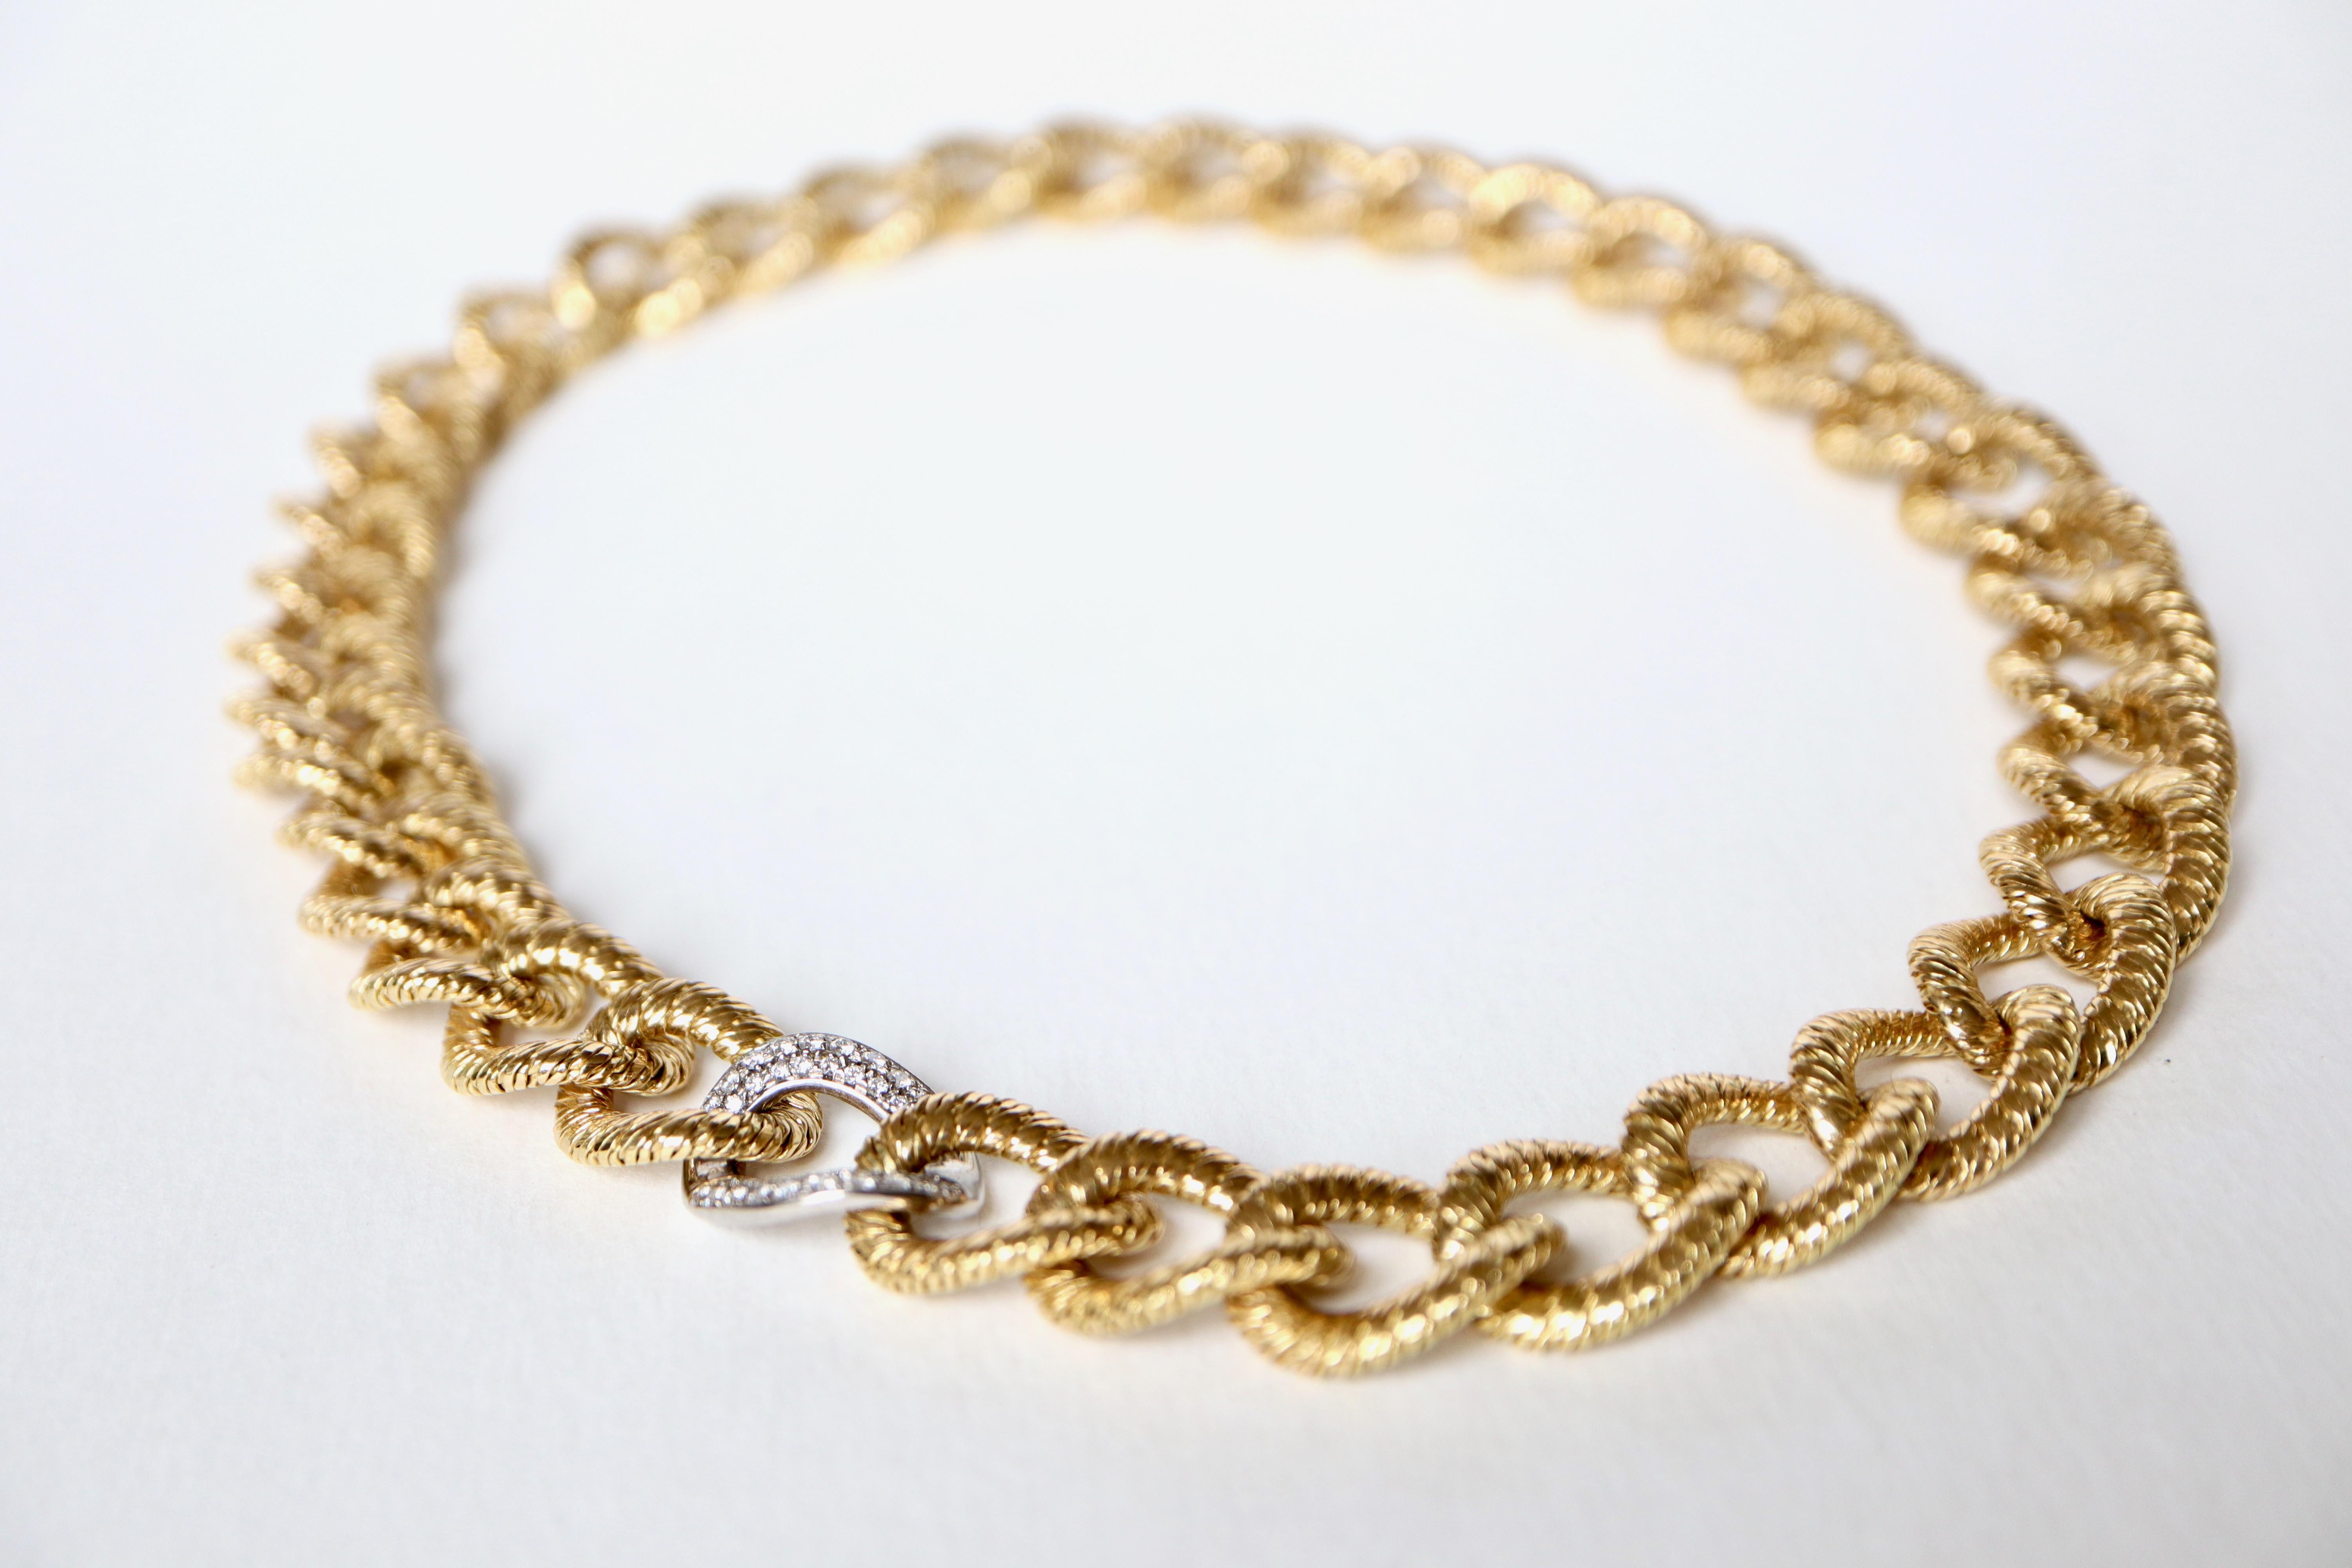 American link necklace in 18 kt yellow gold and Diamonds. Choker-shaped, this American mesh necklace is composed of links in wound gold threads retaining in its center a white gold link paved with diamonds for approximately 0.8 to 1 carat.
Length: